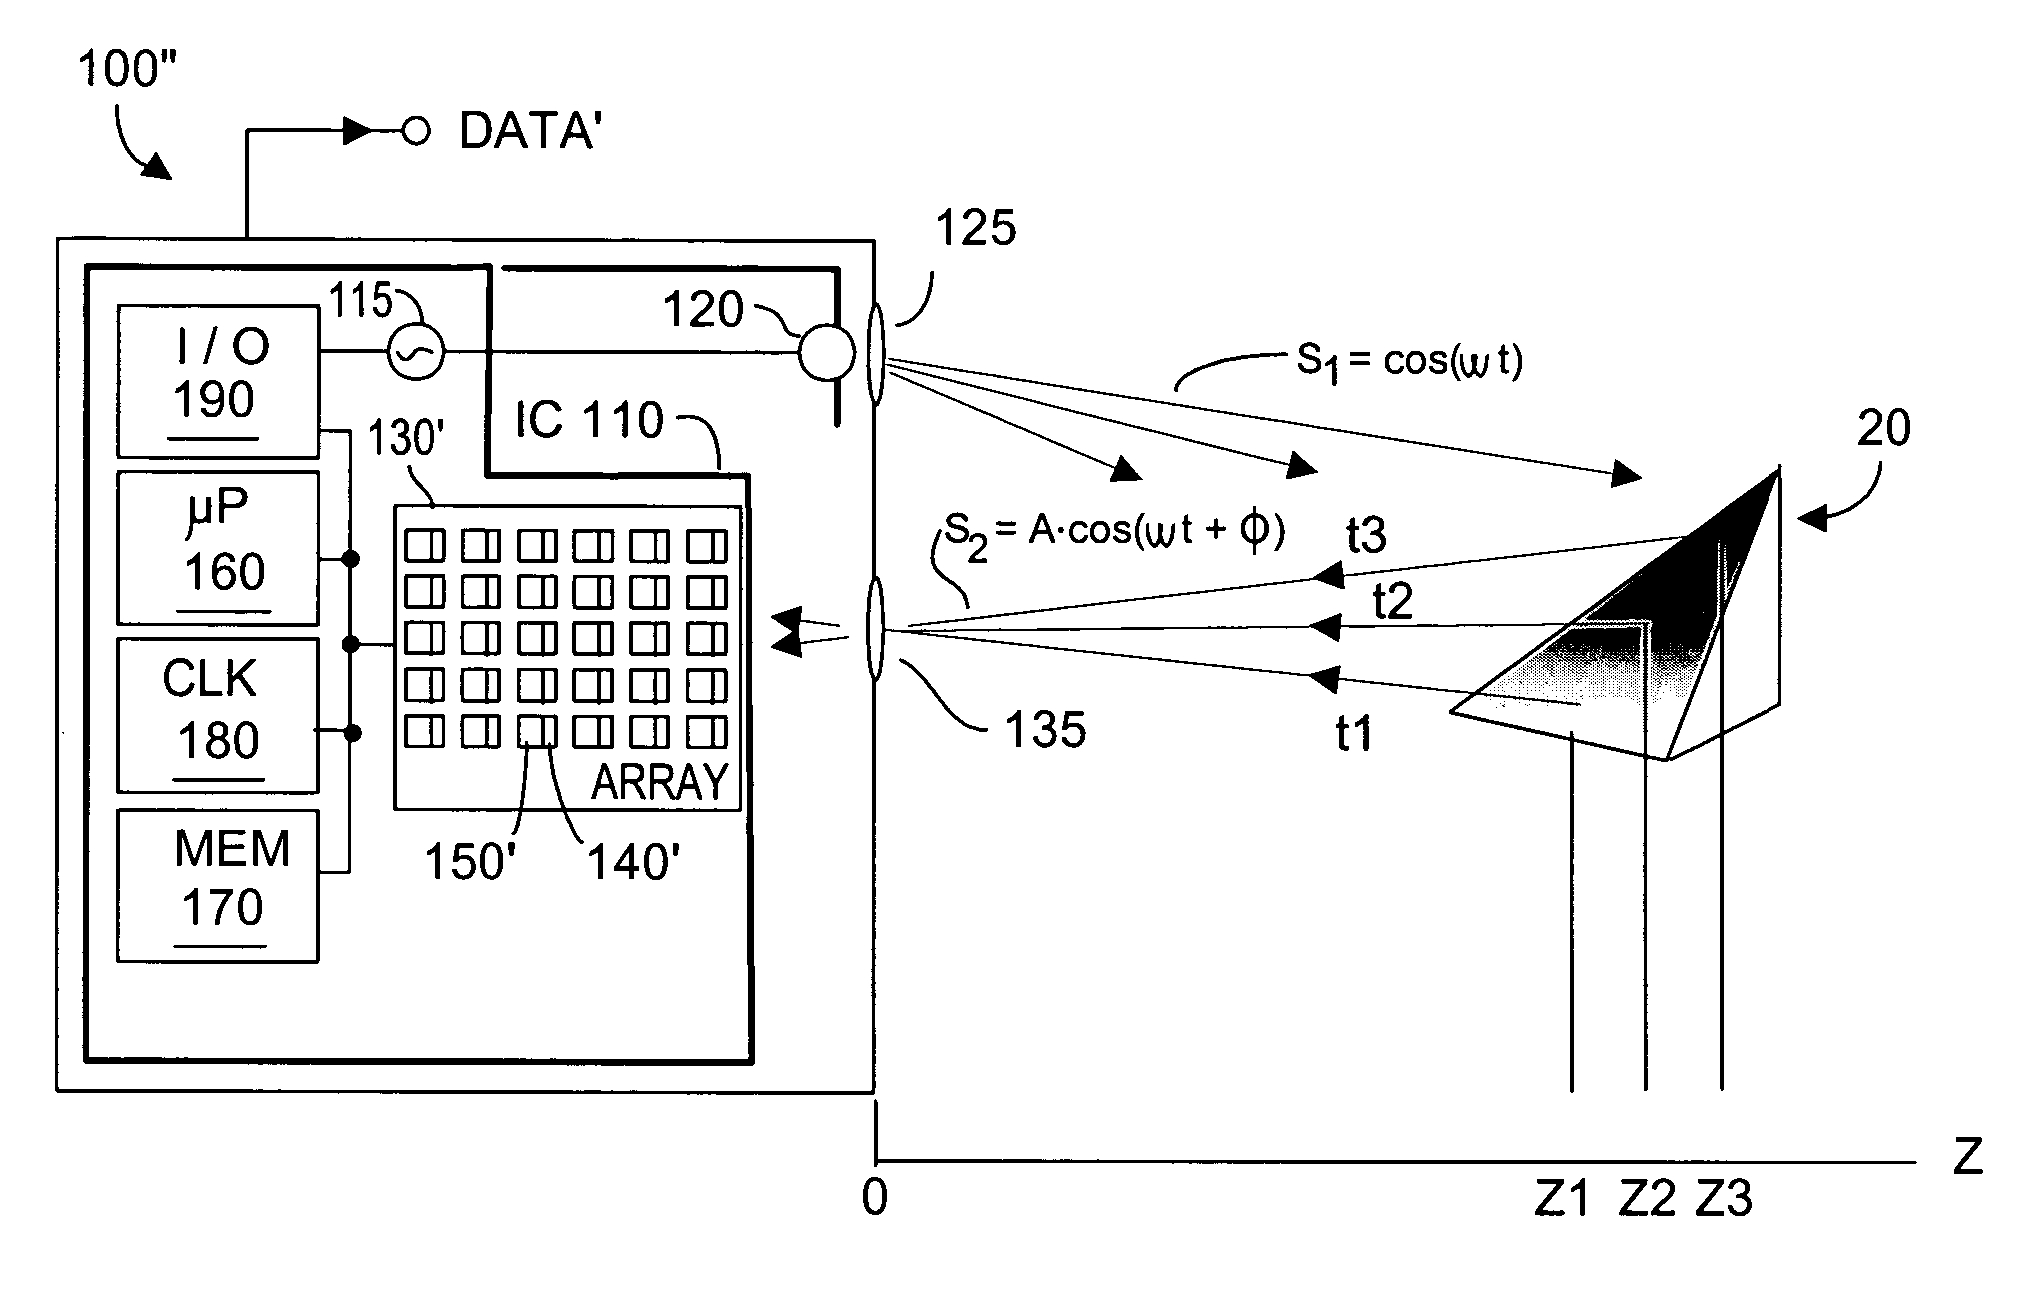 Method and system to correct motion blur and reduce signal transients in time-of-flight sensor systems